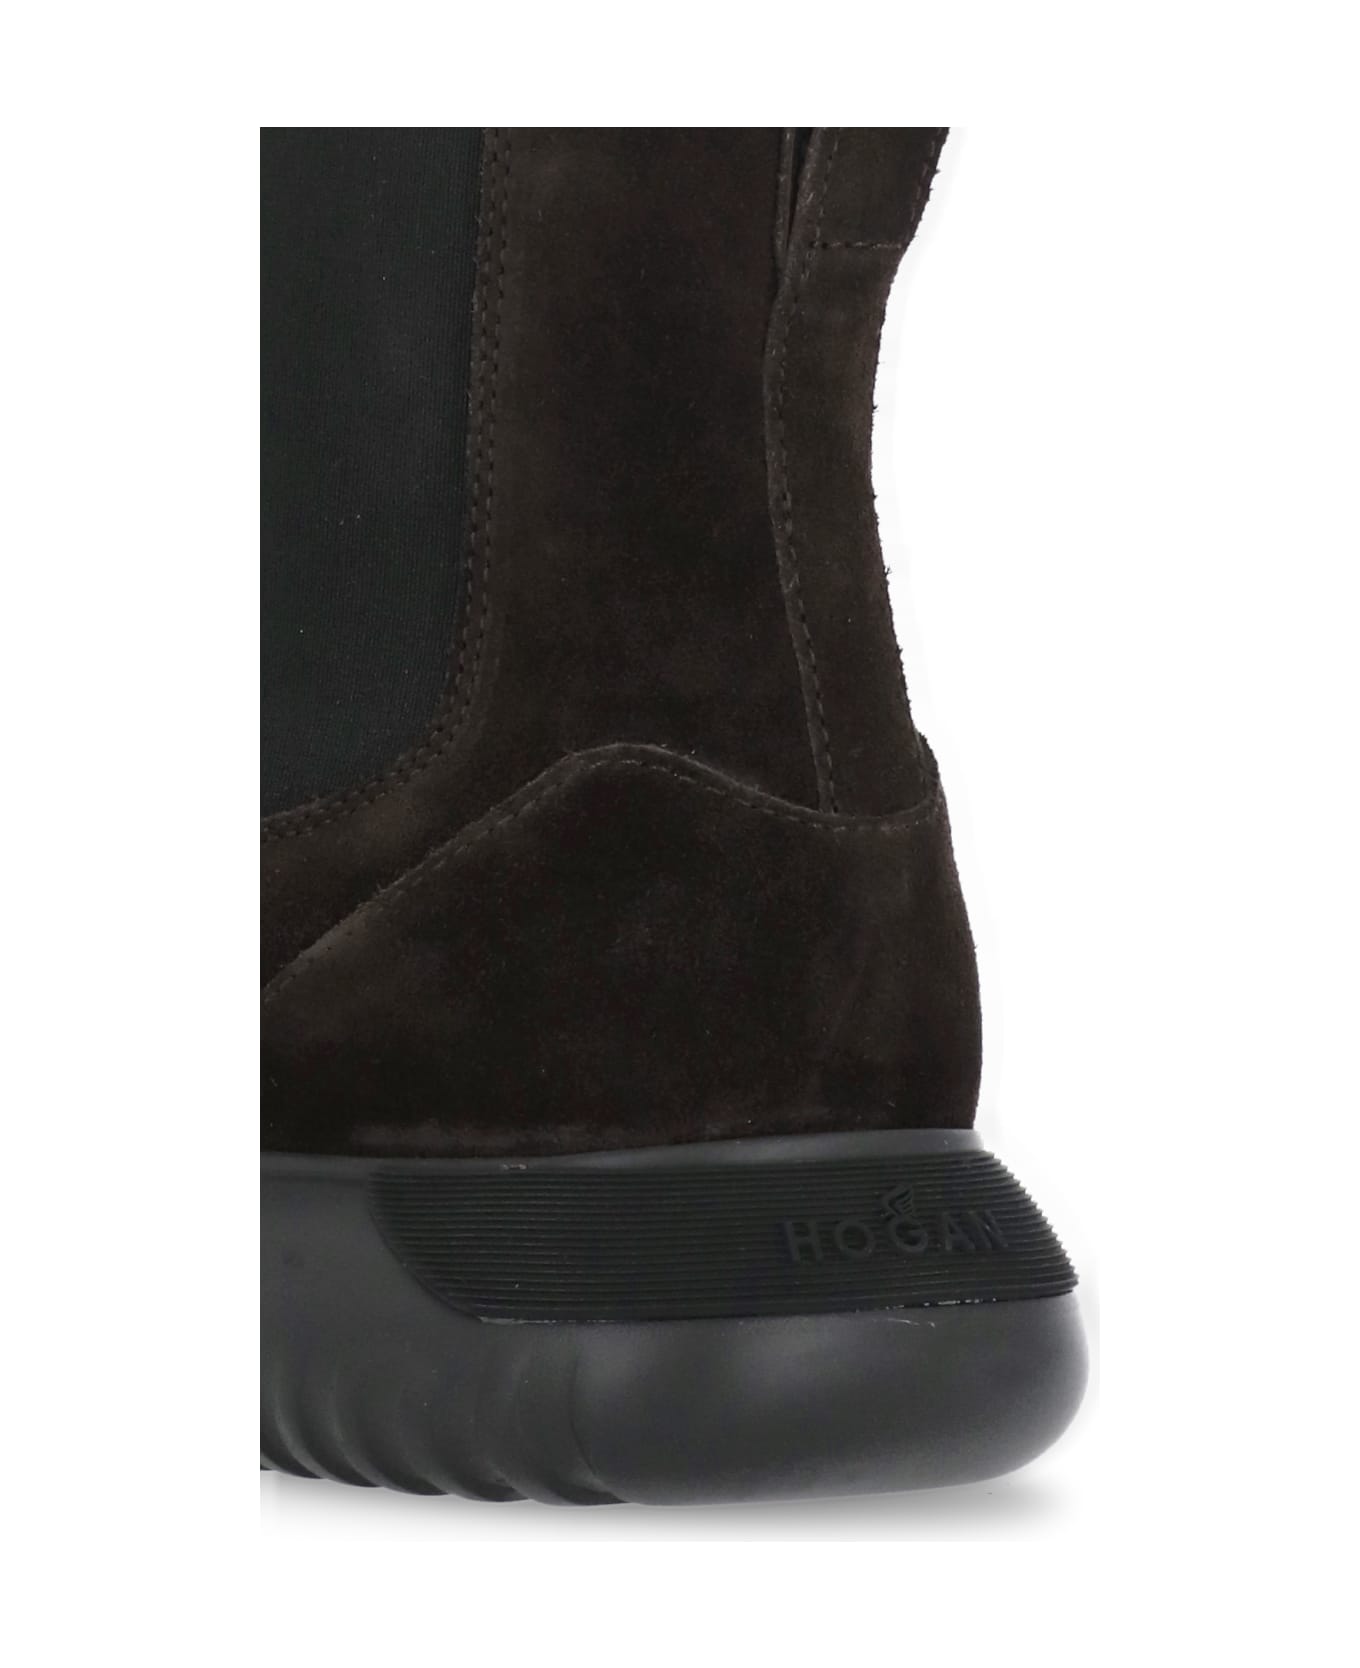 Hogan Round Toe Ankle Boots - Brown